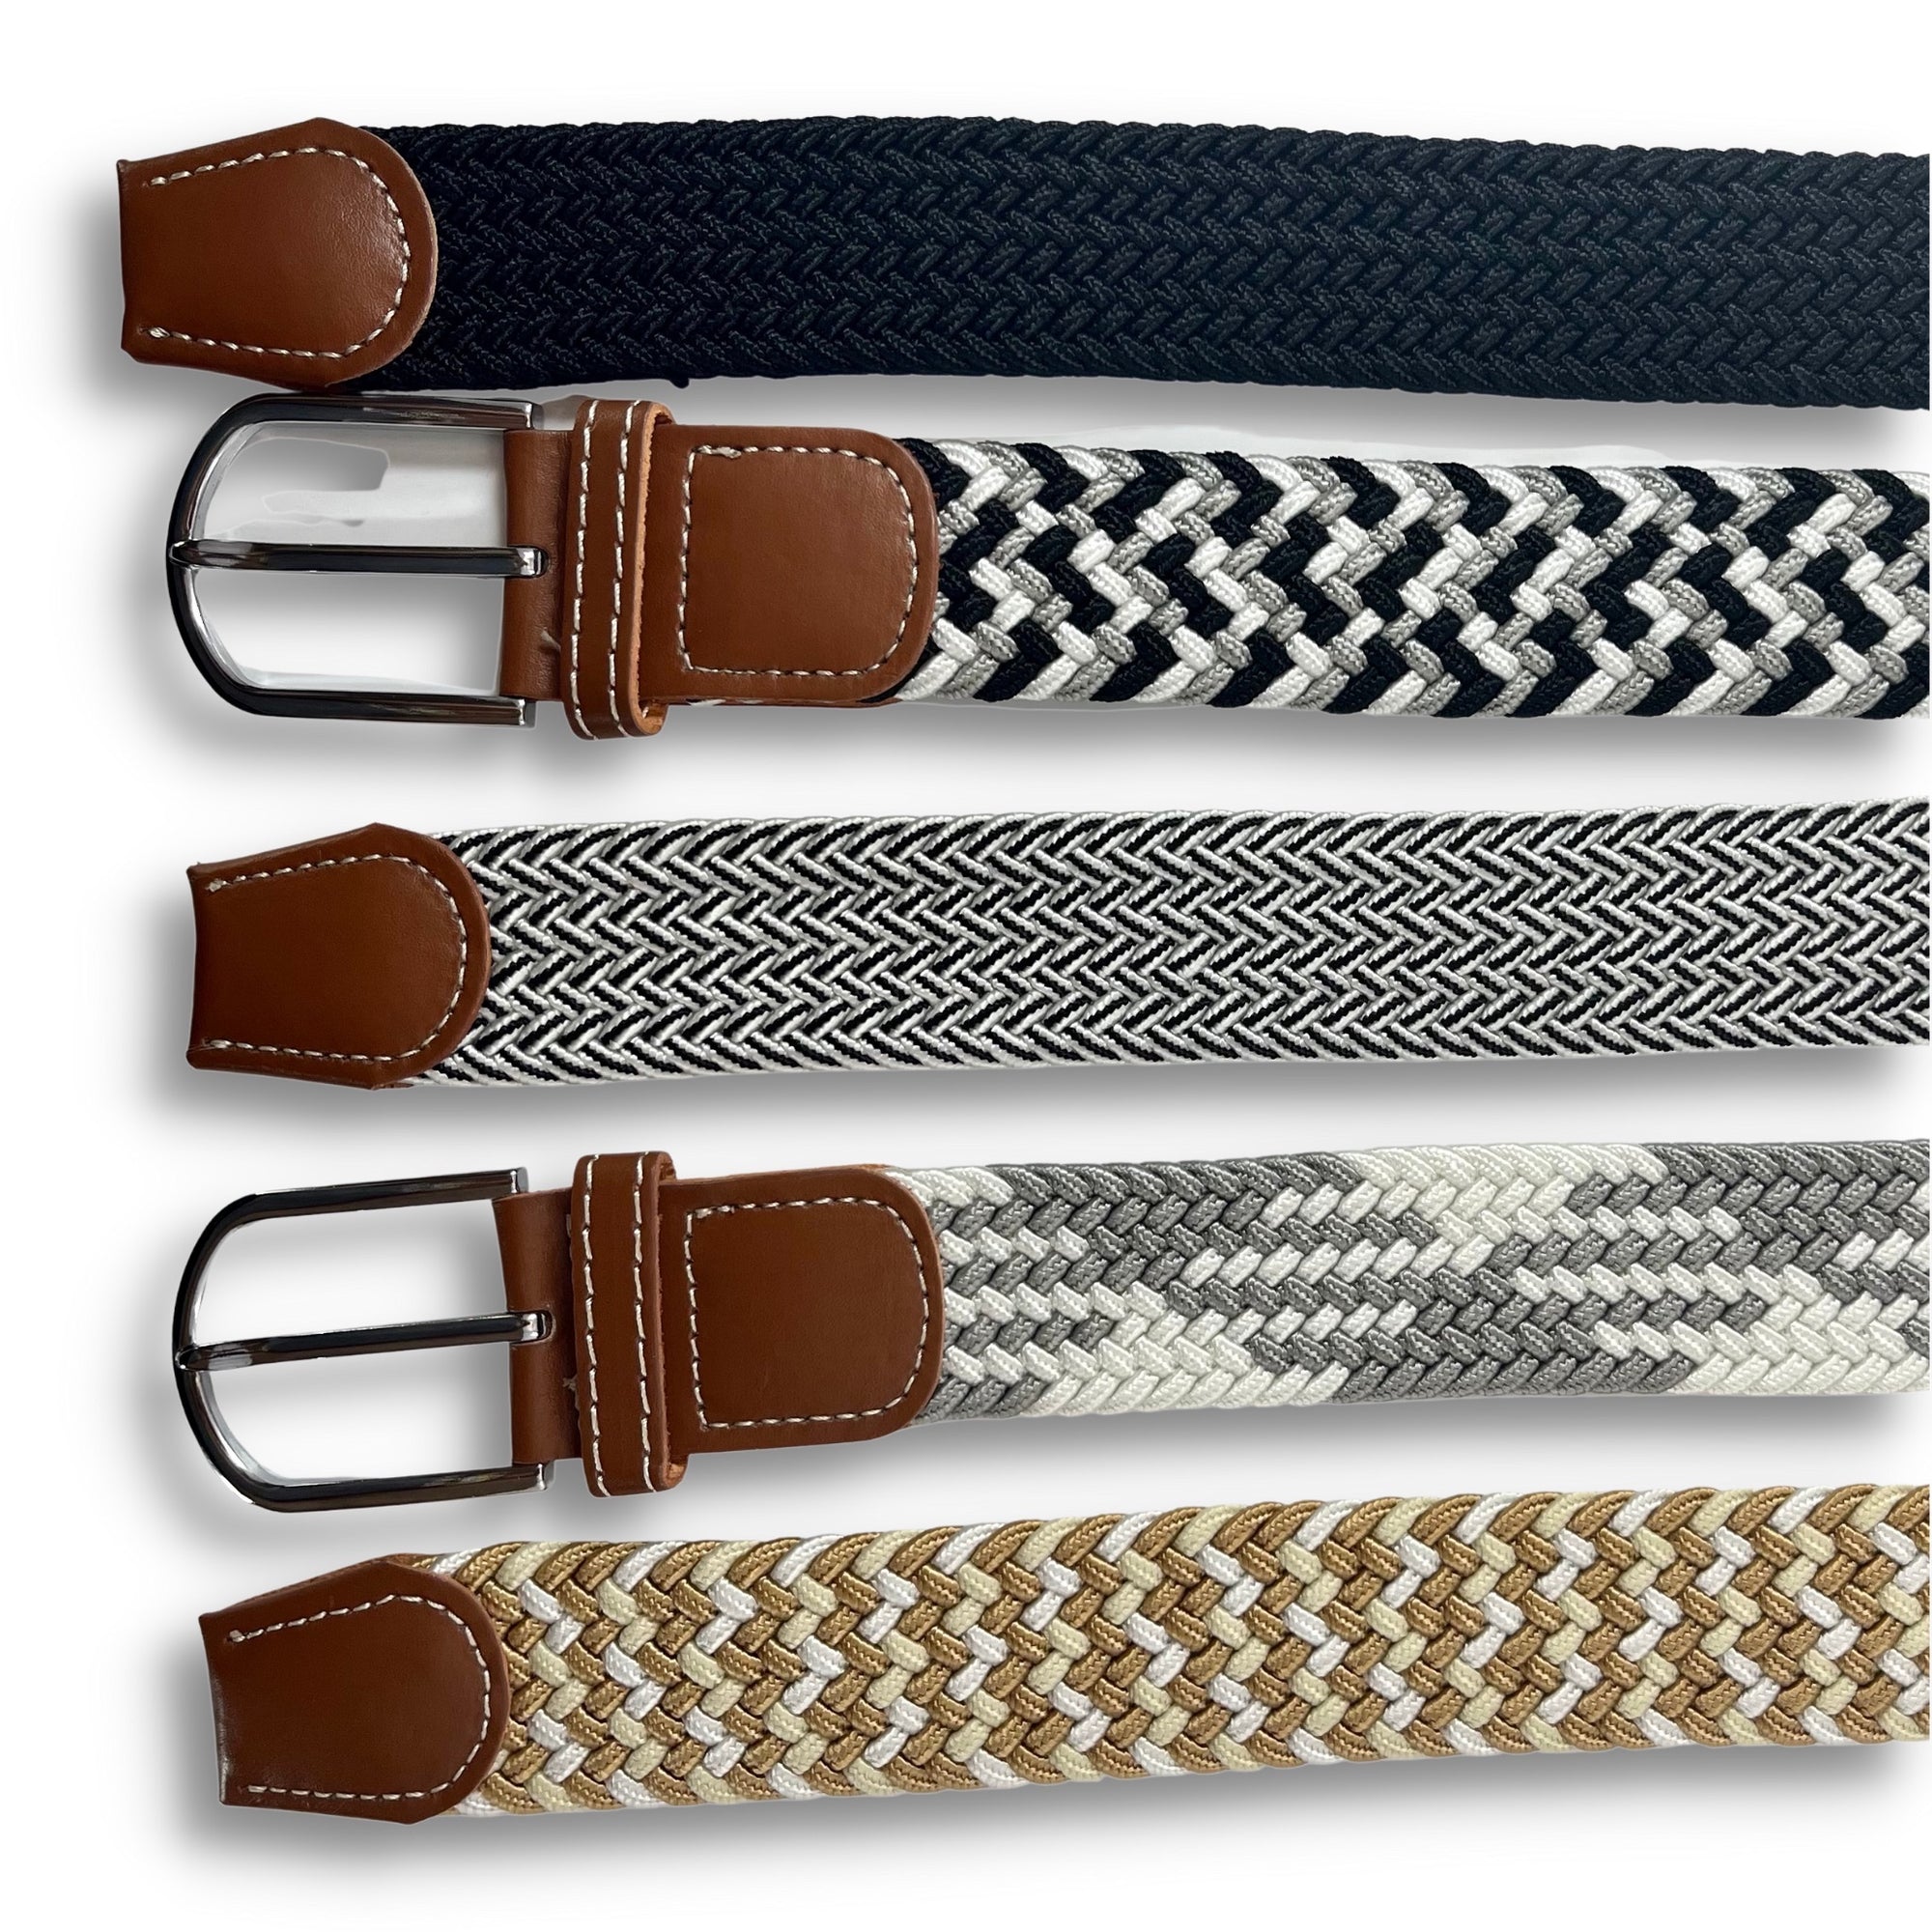 Varying coloured elastic belts, all with silver buckles and brown leather ends.